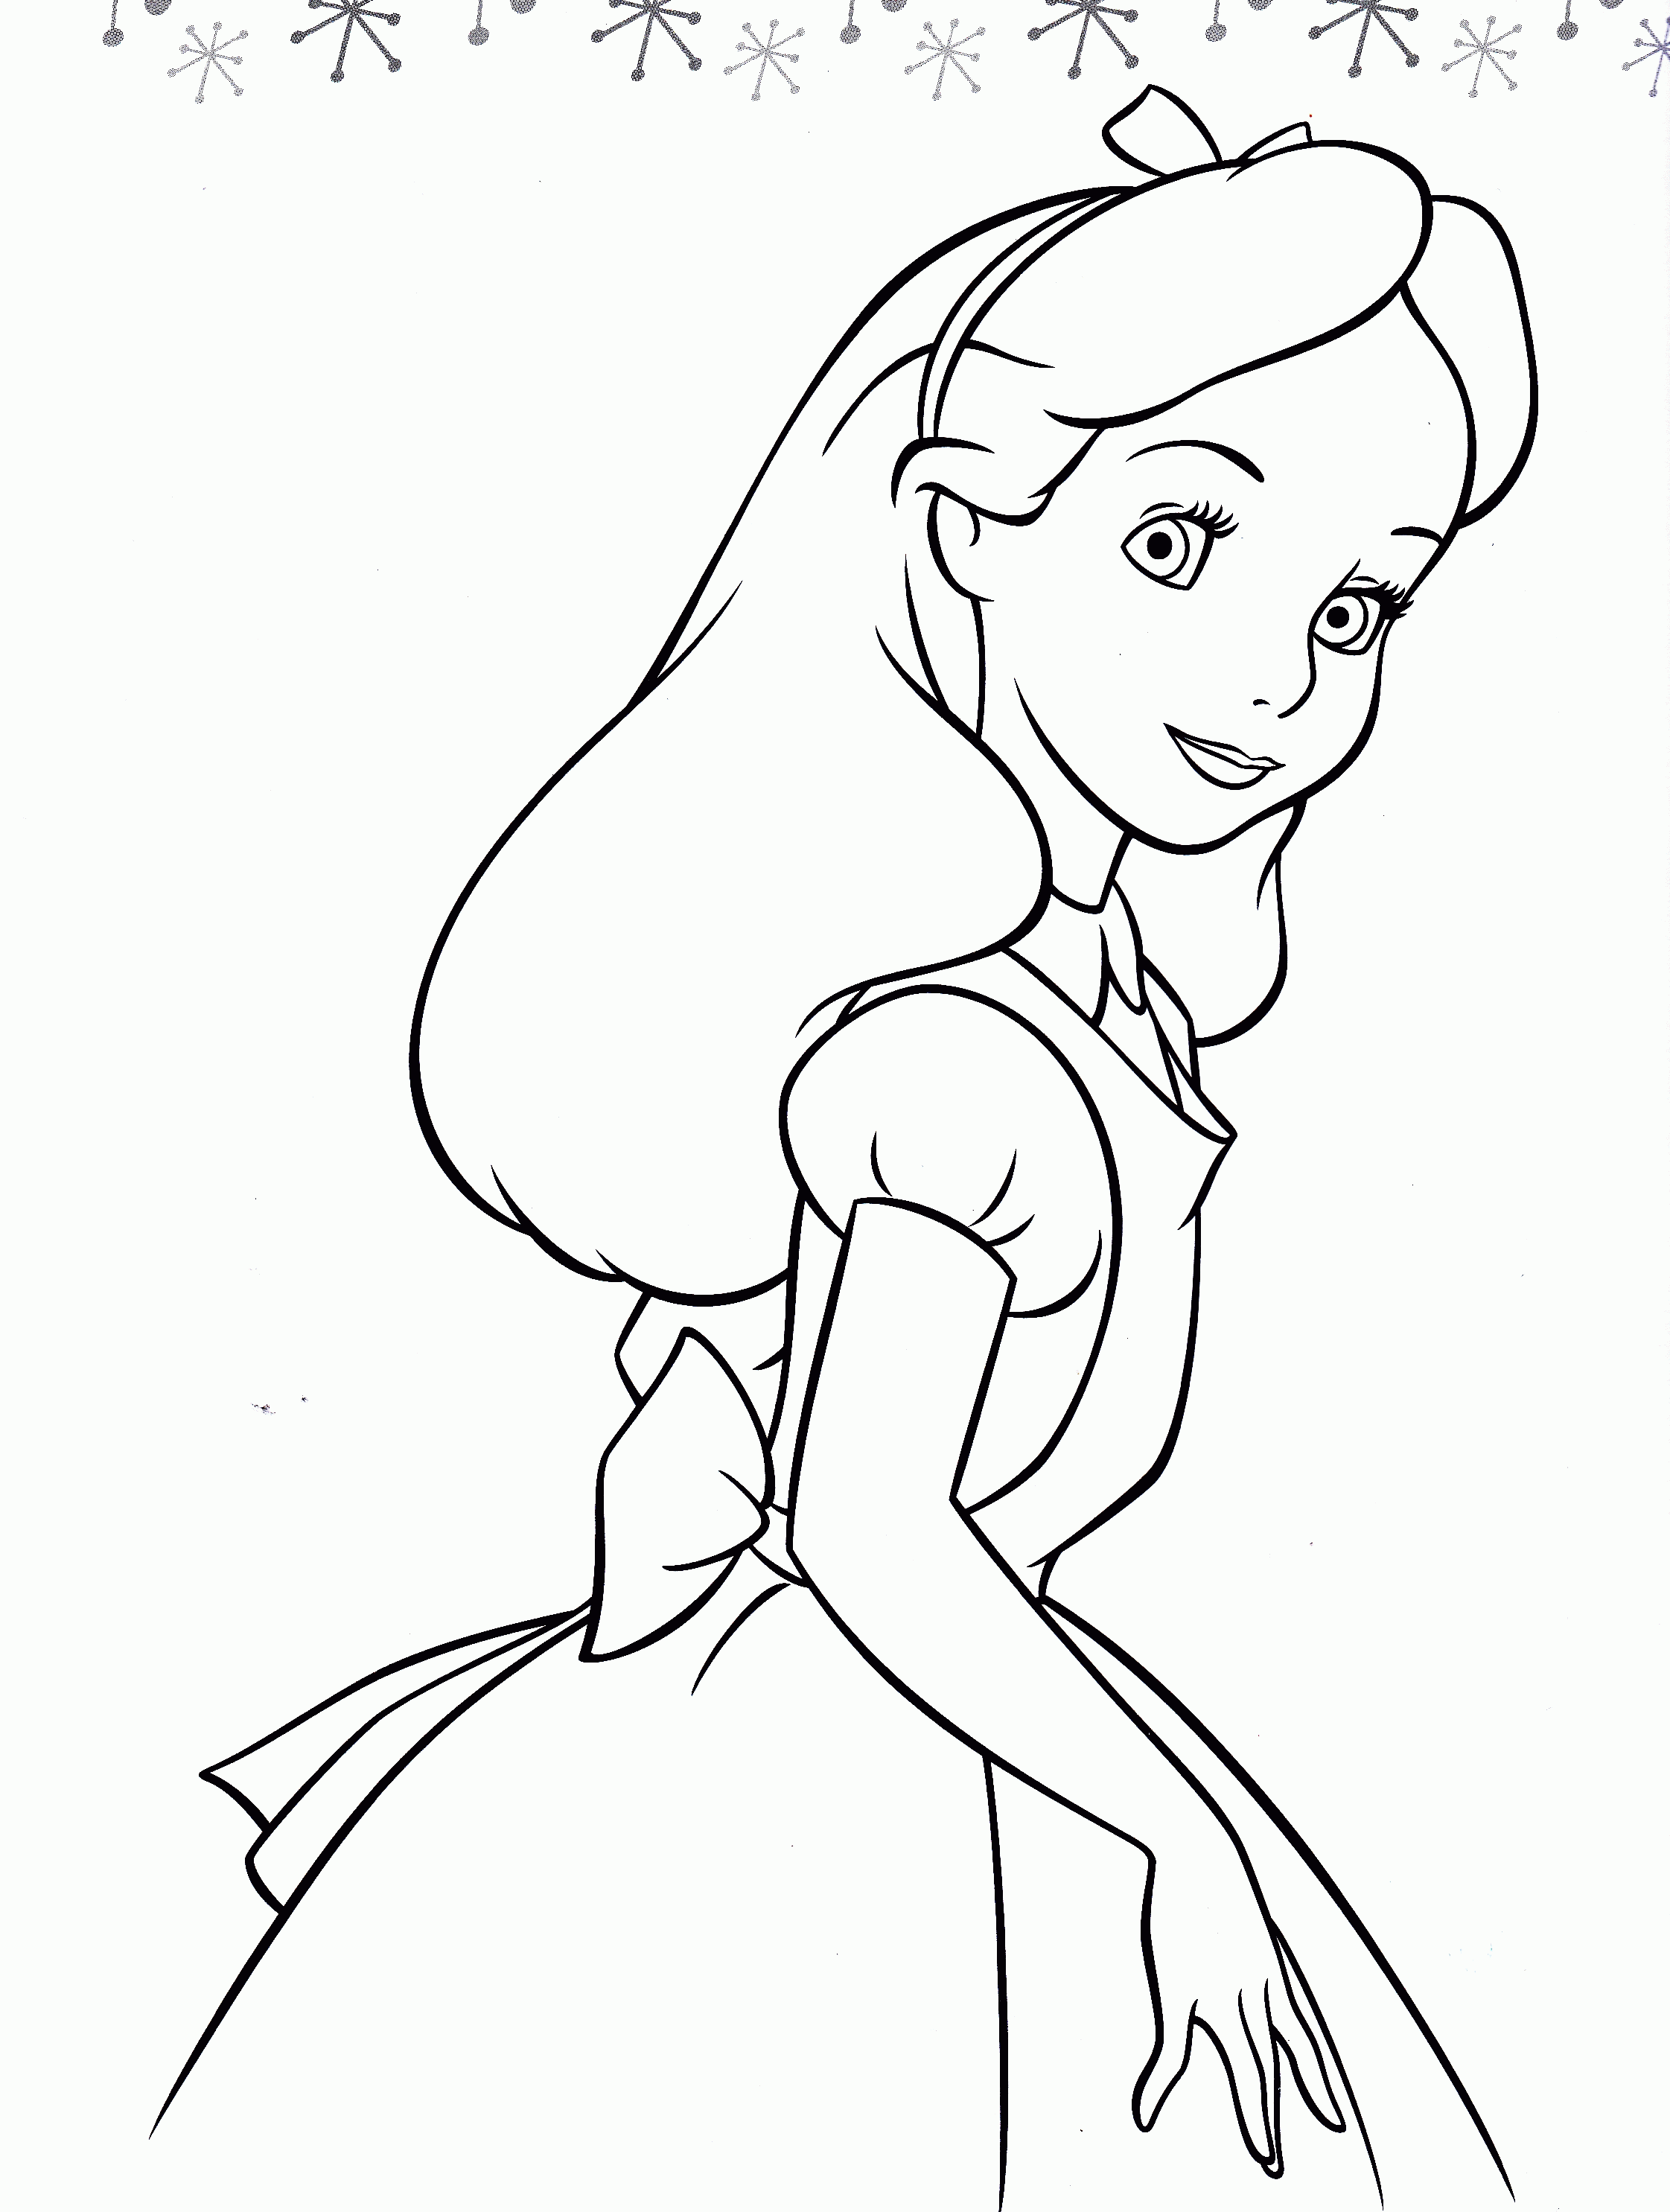 Alice In Wonderland Coloring Pages Disney - Coloring Page